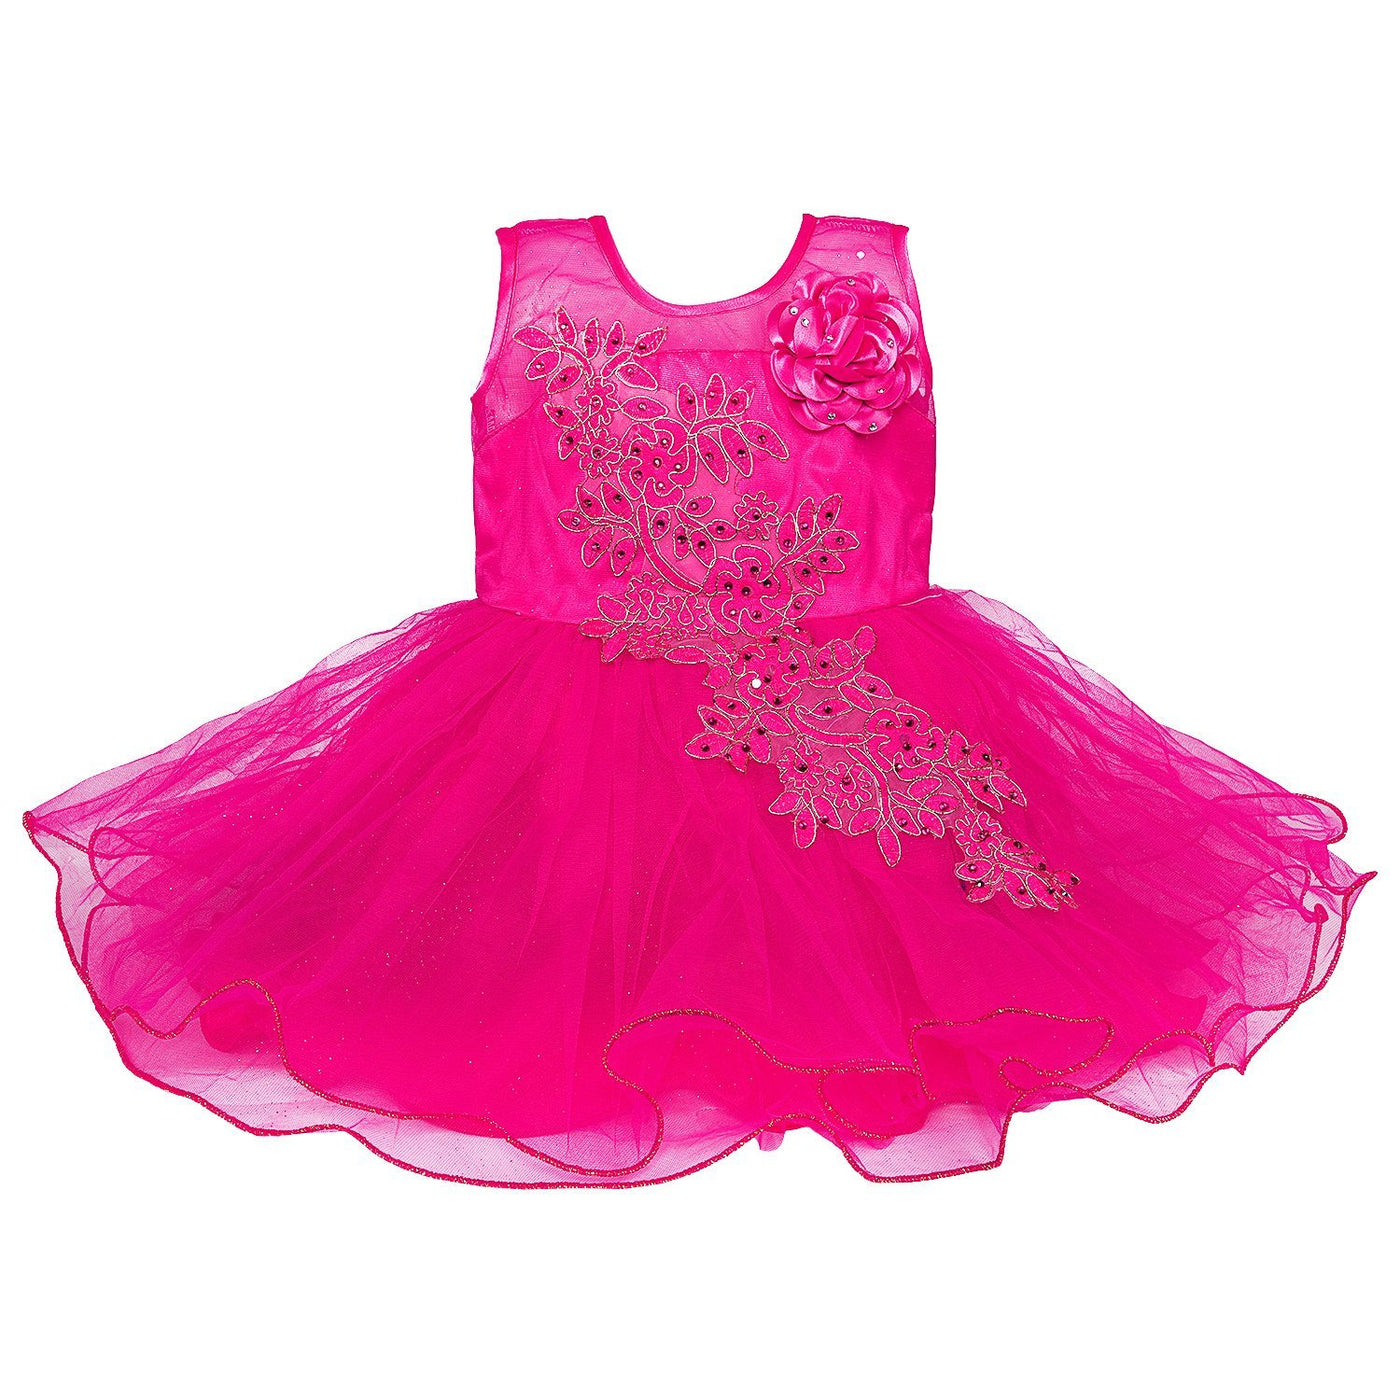 pink colour frock dress